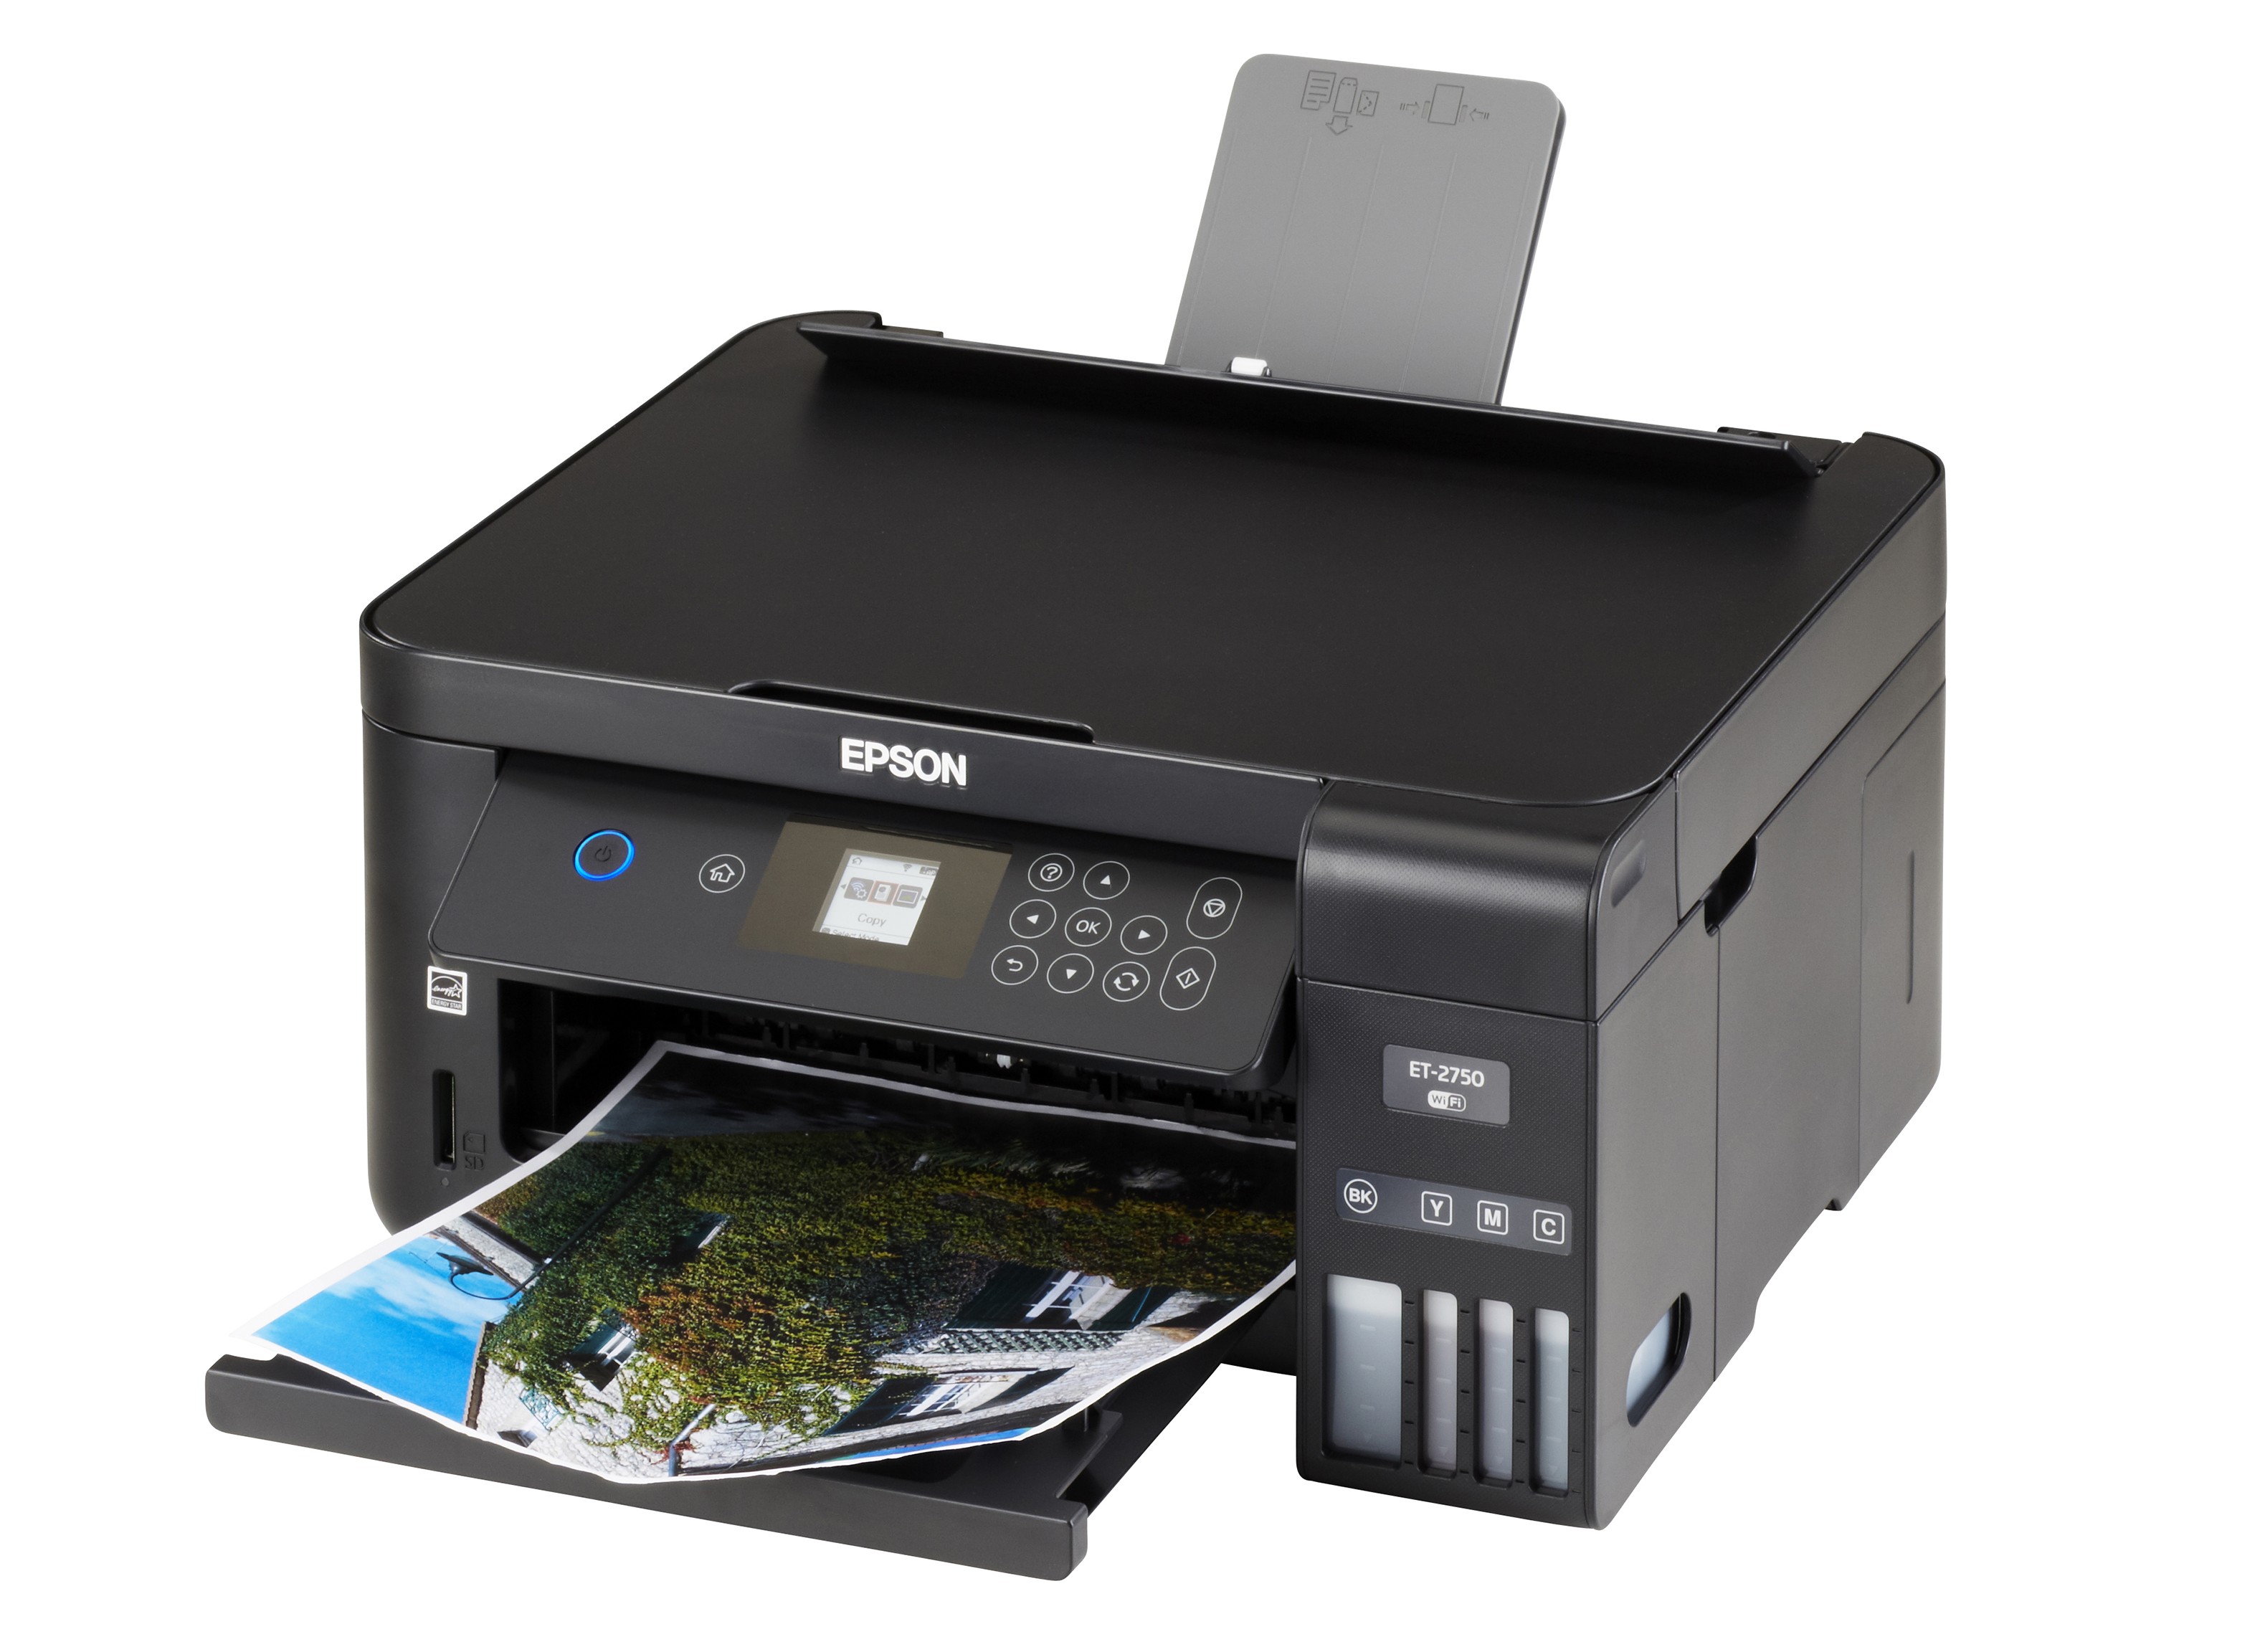 Epson Printer Review - Consumer Reports